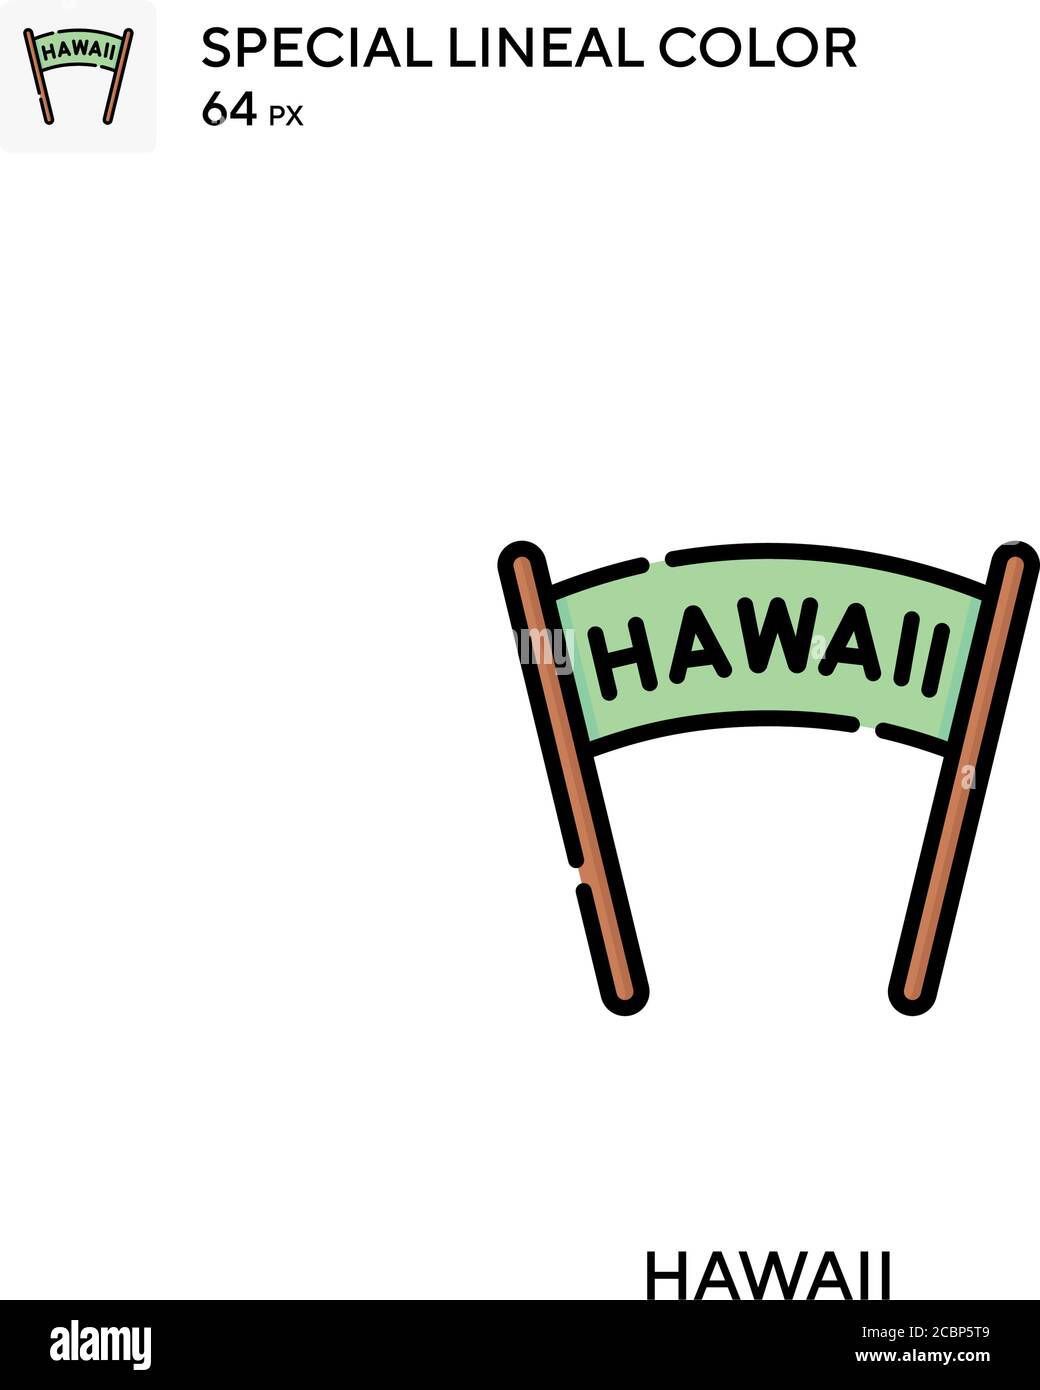 Hawaii Special lineal color vector icon. Hawaii icons for your business project Stock Vector